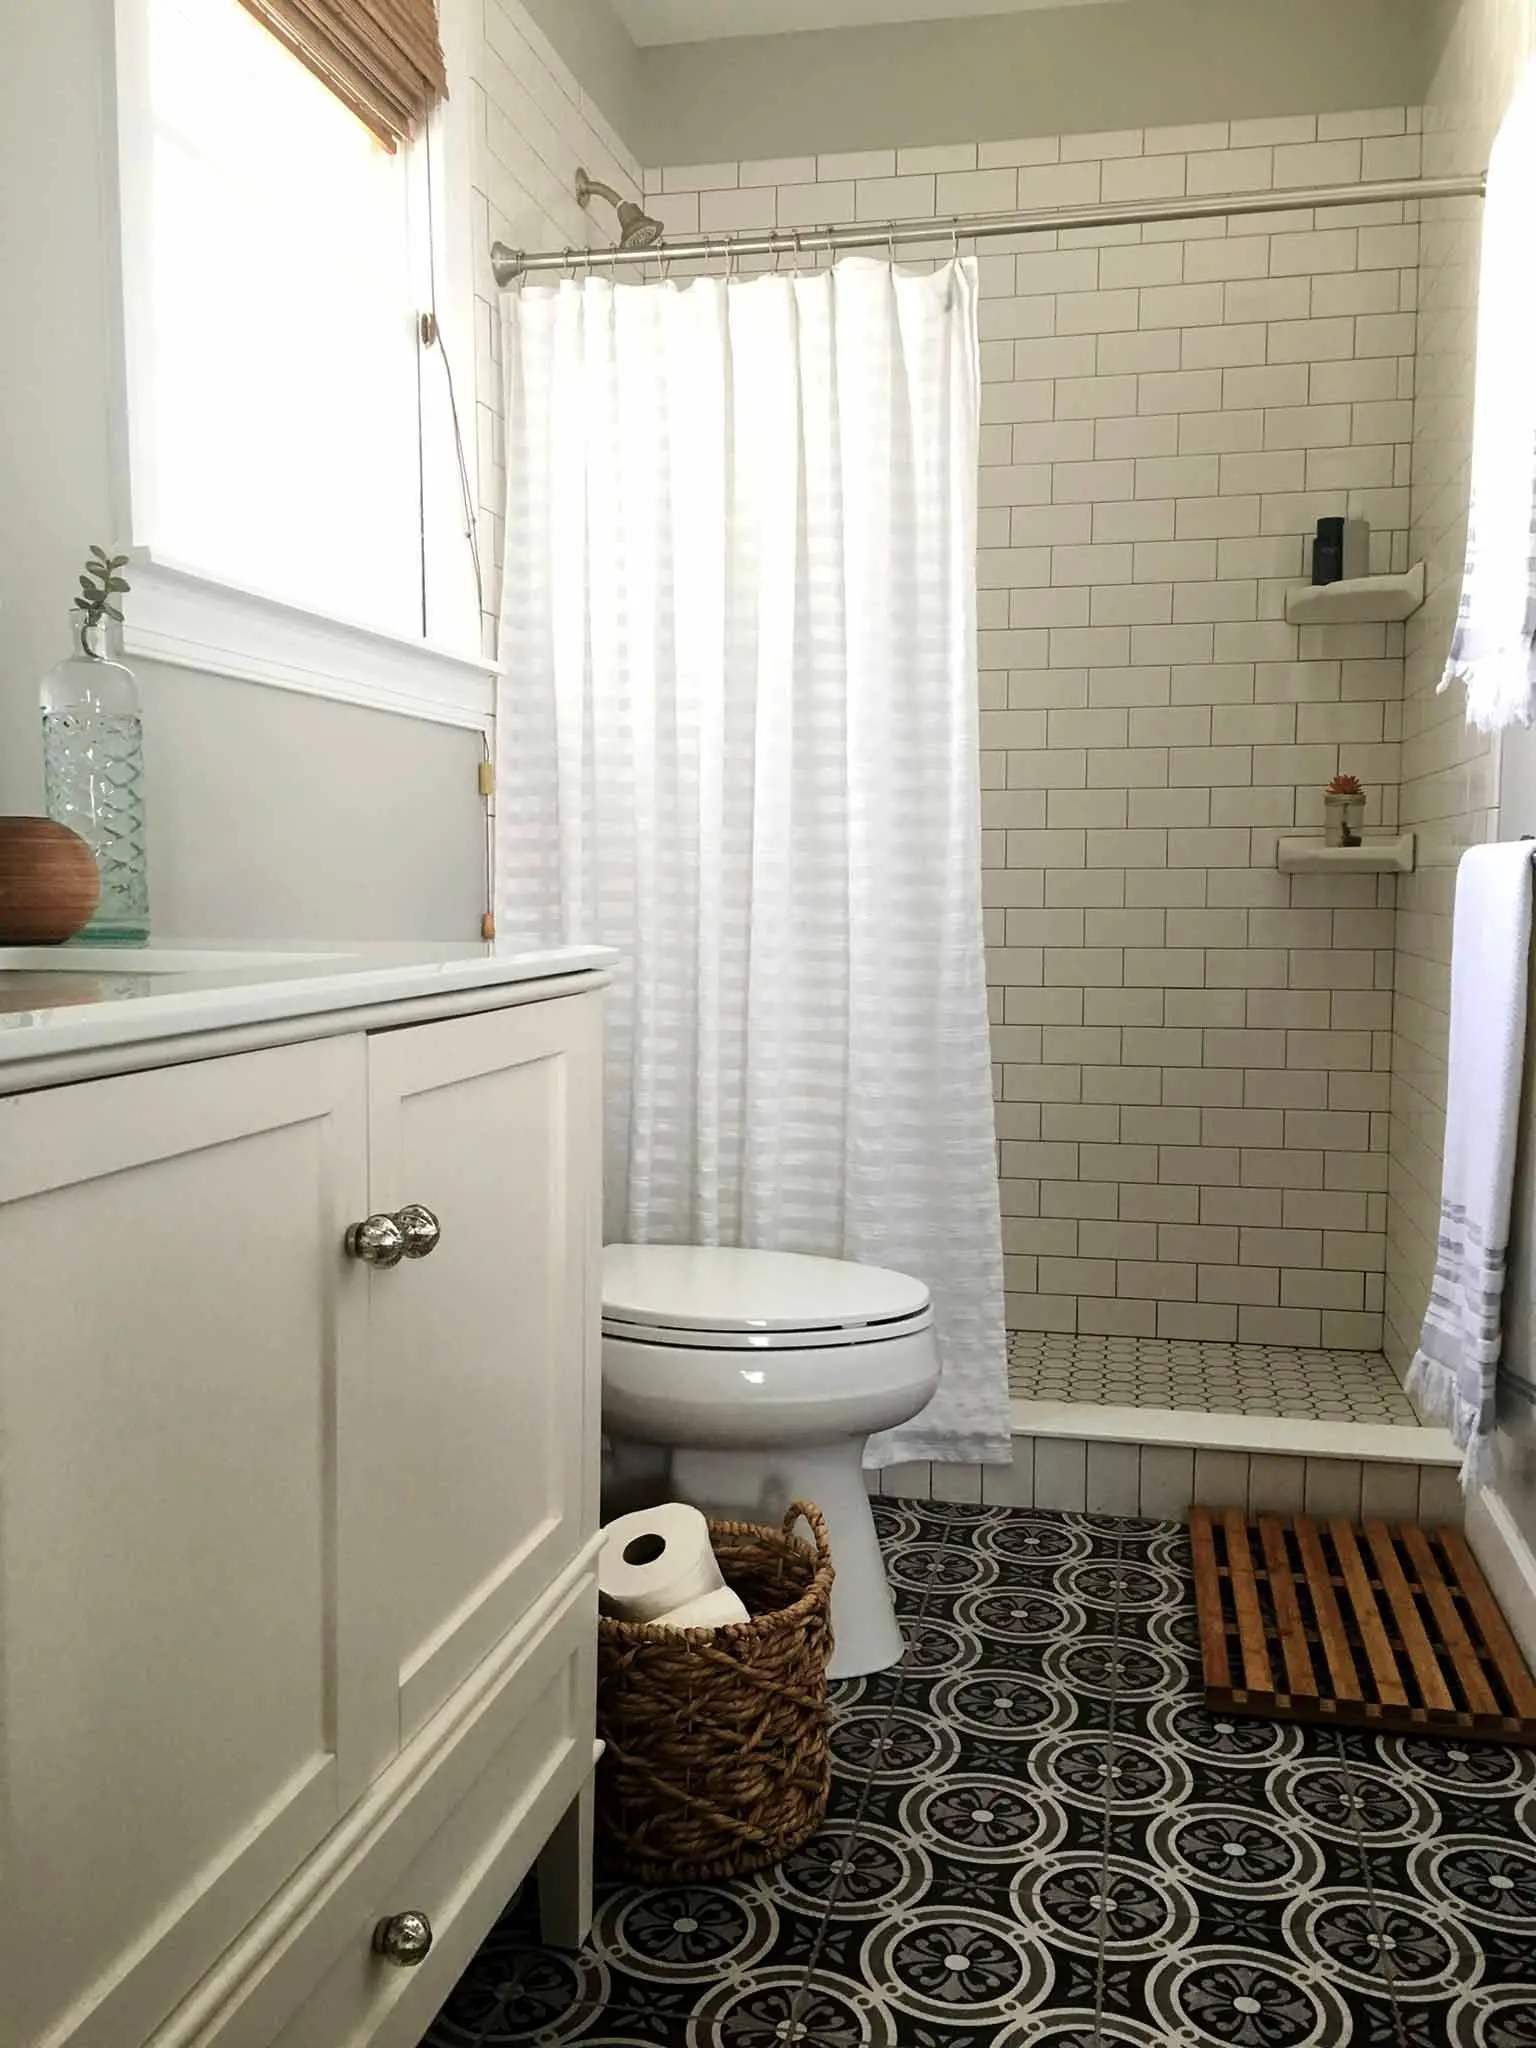 Step By Step Guide To Choosing Materials For A Bathroom Renovation